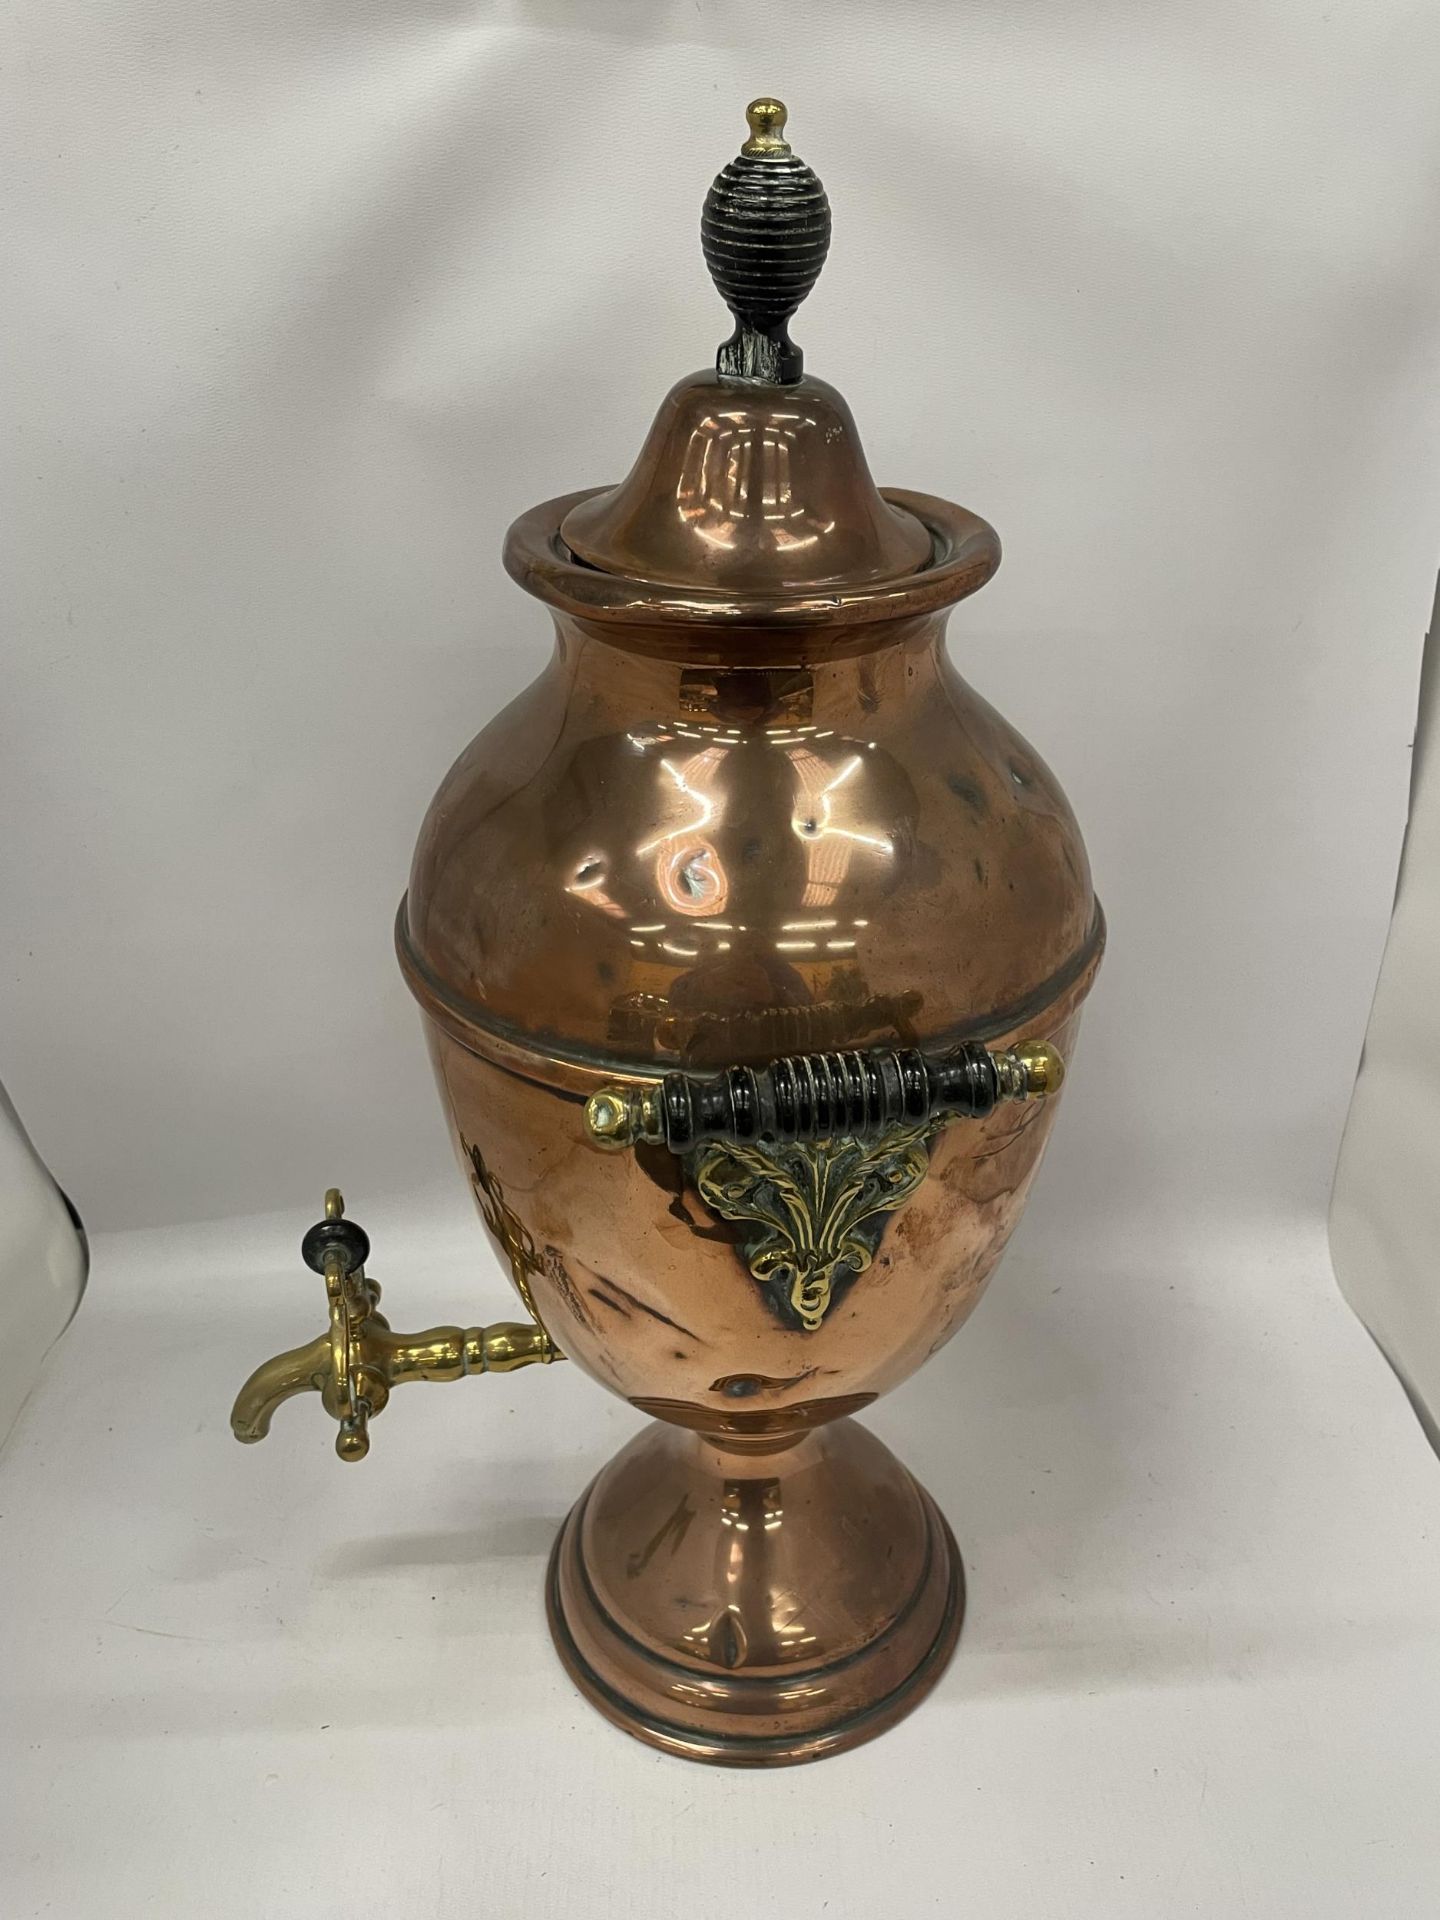 AN EARLY 20TH CENTURY TWIN HANDLED COPPER SAMOVAR URN WITH BRASS TAP - Image 2 of 4